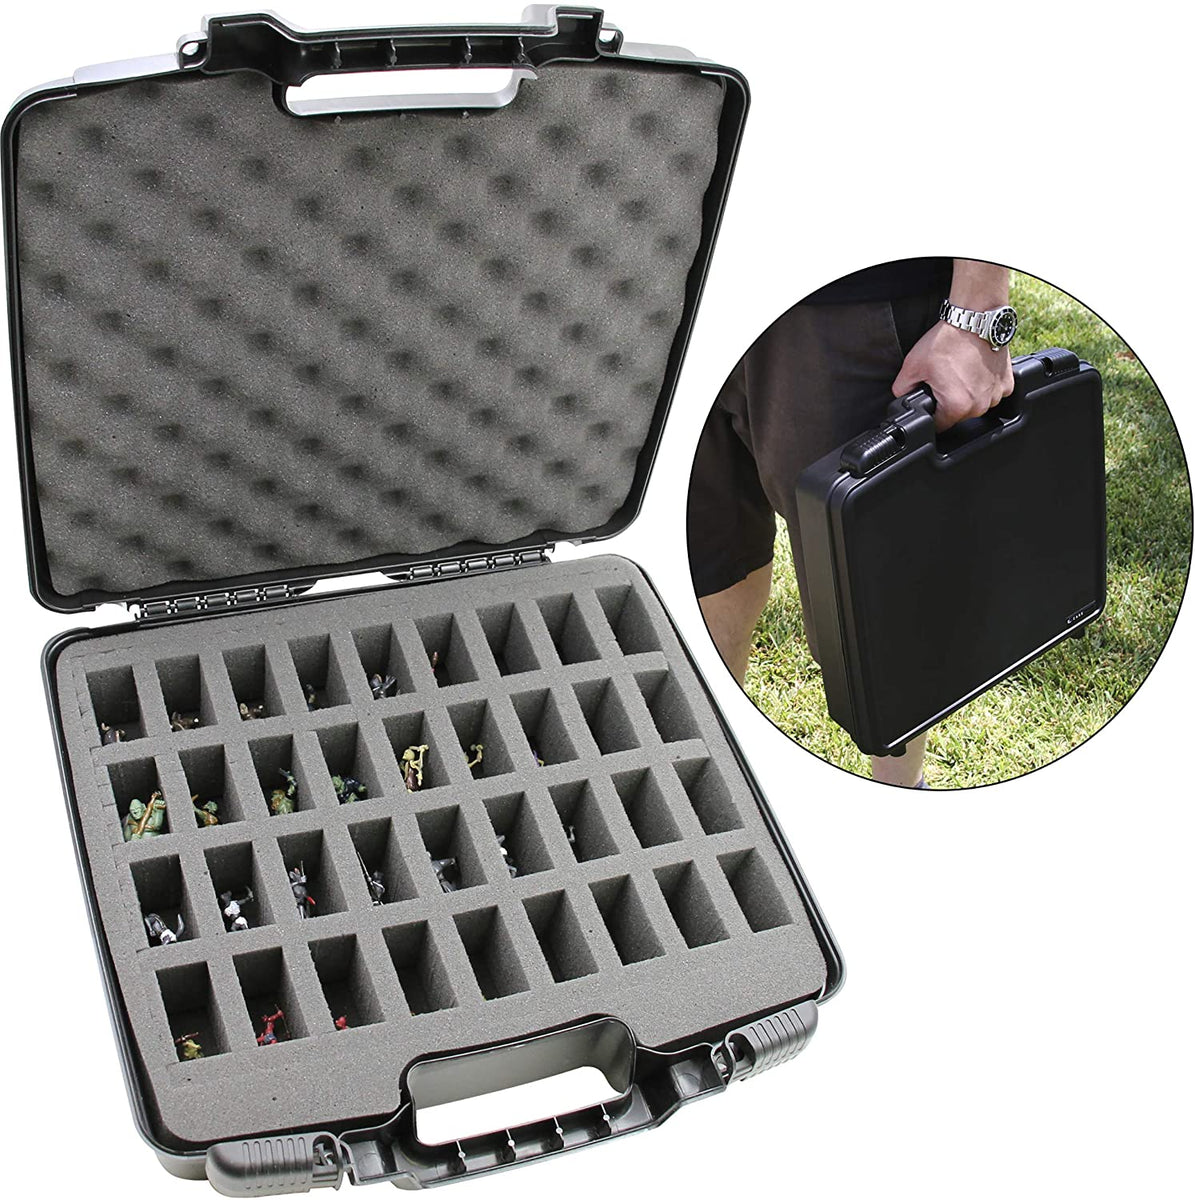 CASEMATIX Miniature Carrying Case with Programmable Lock - 144 Slot  Miniature Storage Case with Four Foam Trays For Minis, Shoulder Strap and  More!